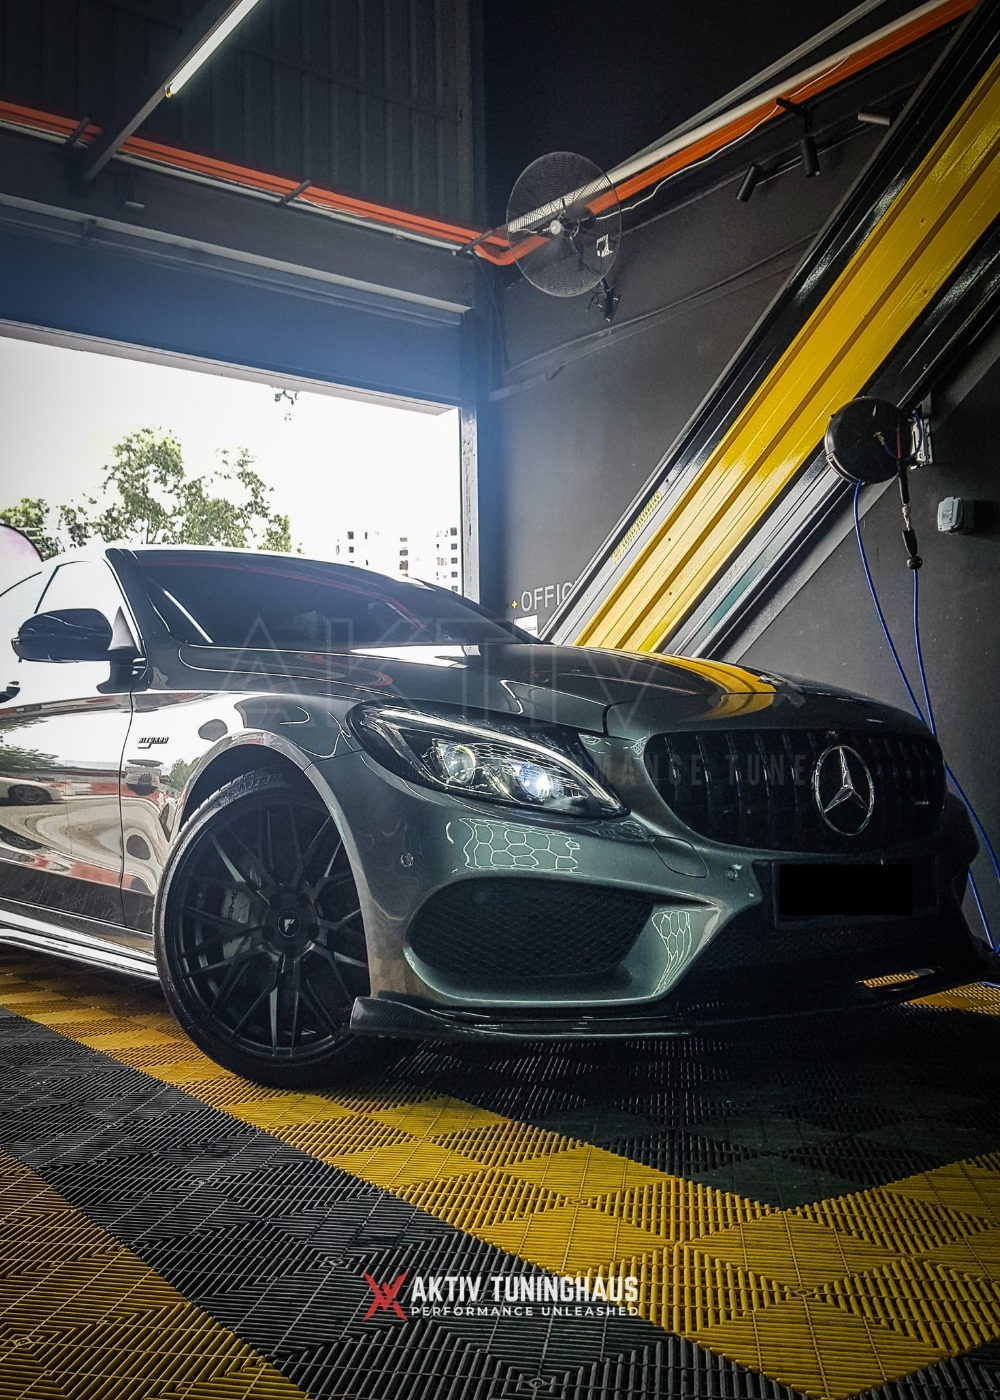 AK-Tuning Thailand - Mercedes Benz W204 C180 . ☑️ Stock 156HP , 230Nm  ========================= ✓ stage2 tuned ========================= 🔥  196HP, 280Nm ✔️ + 40HP , +50 NM ======================== 📲 LINE :  @euro_haus